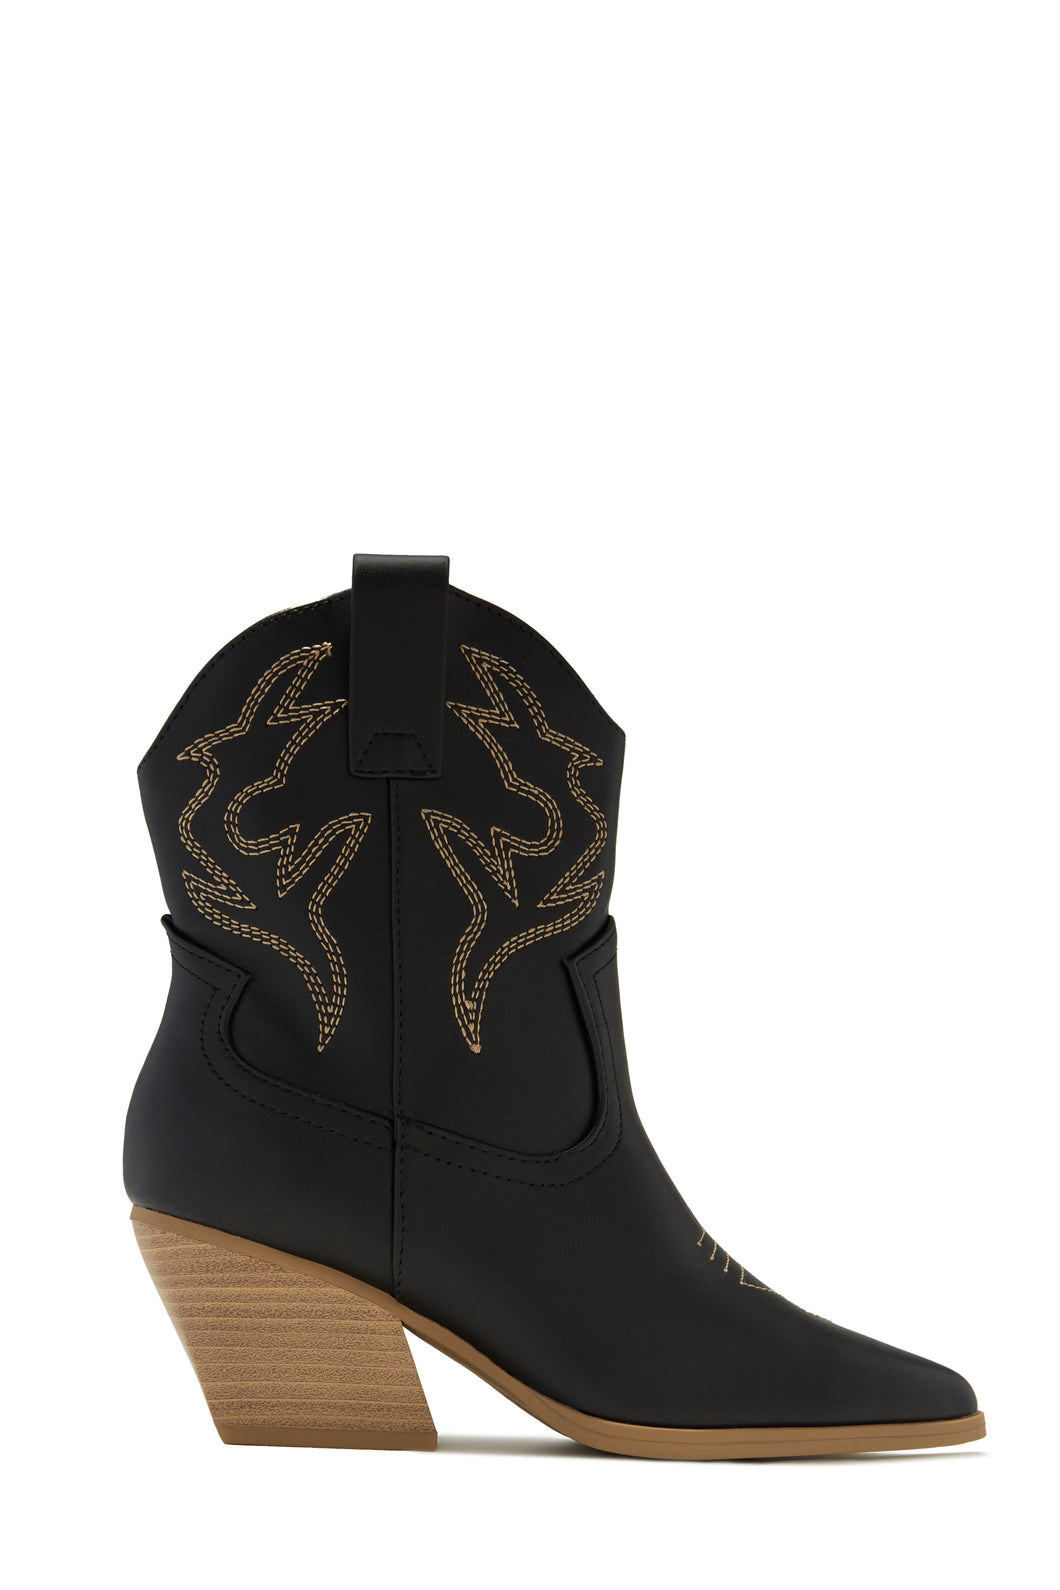 Festival Playlist Cowgirl Boots - Black